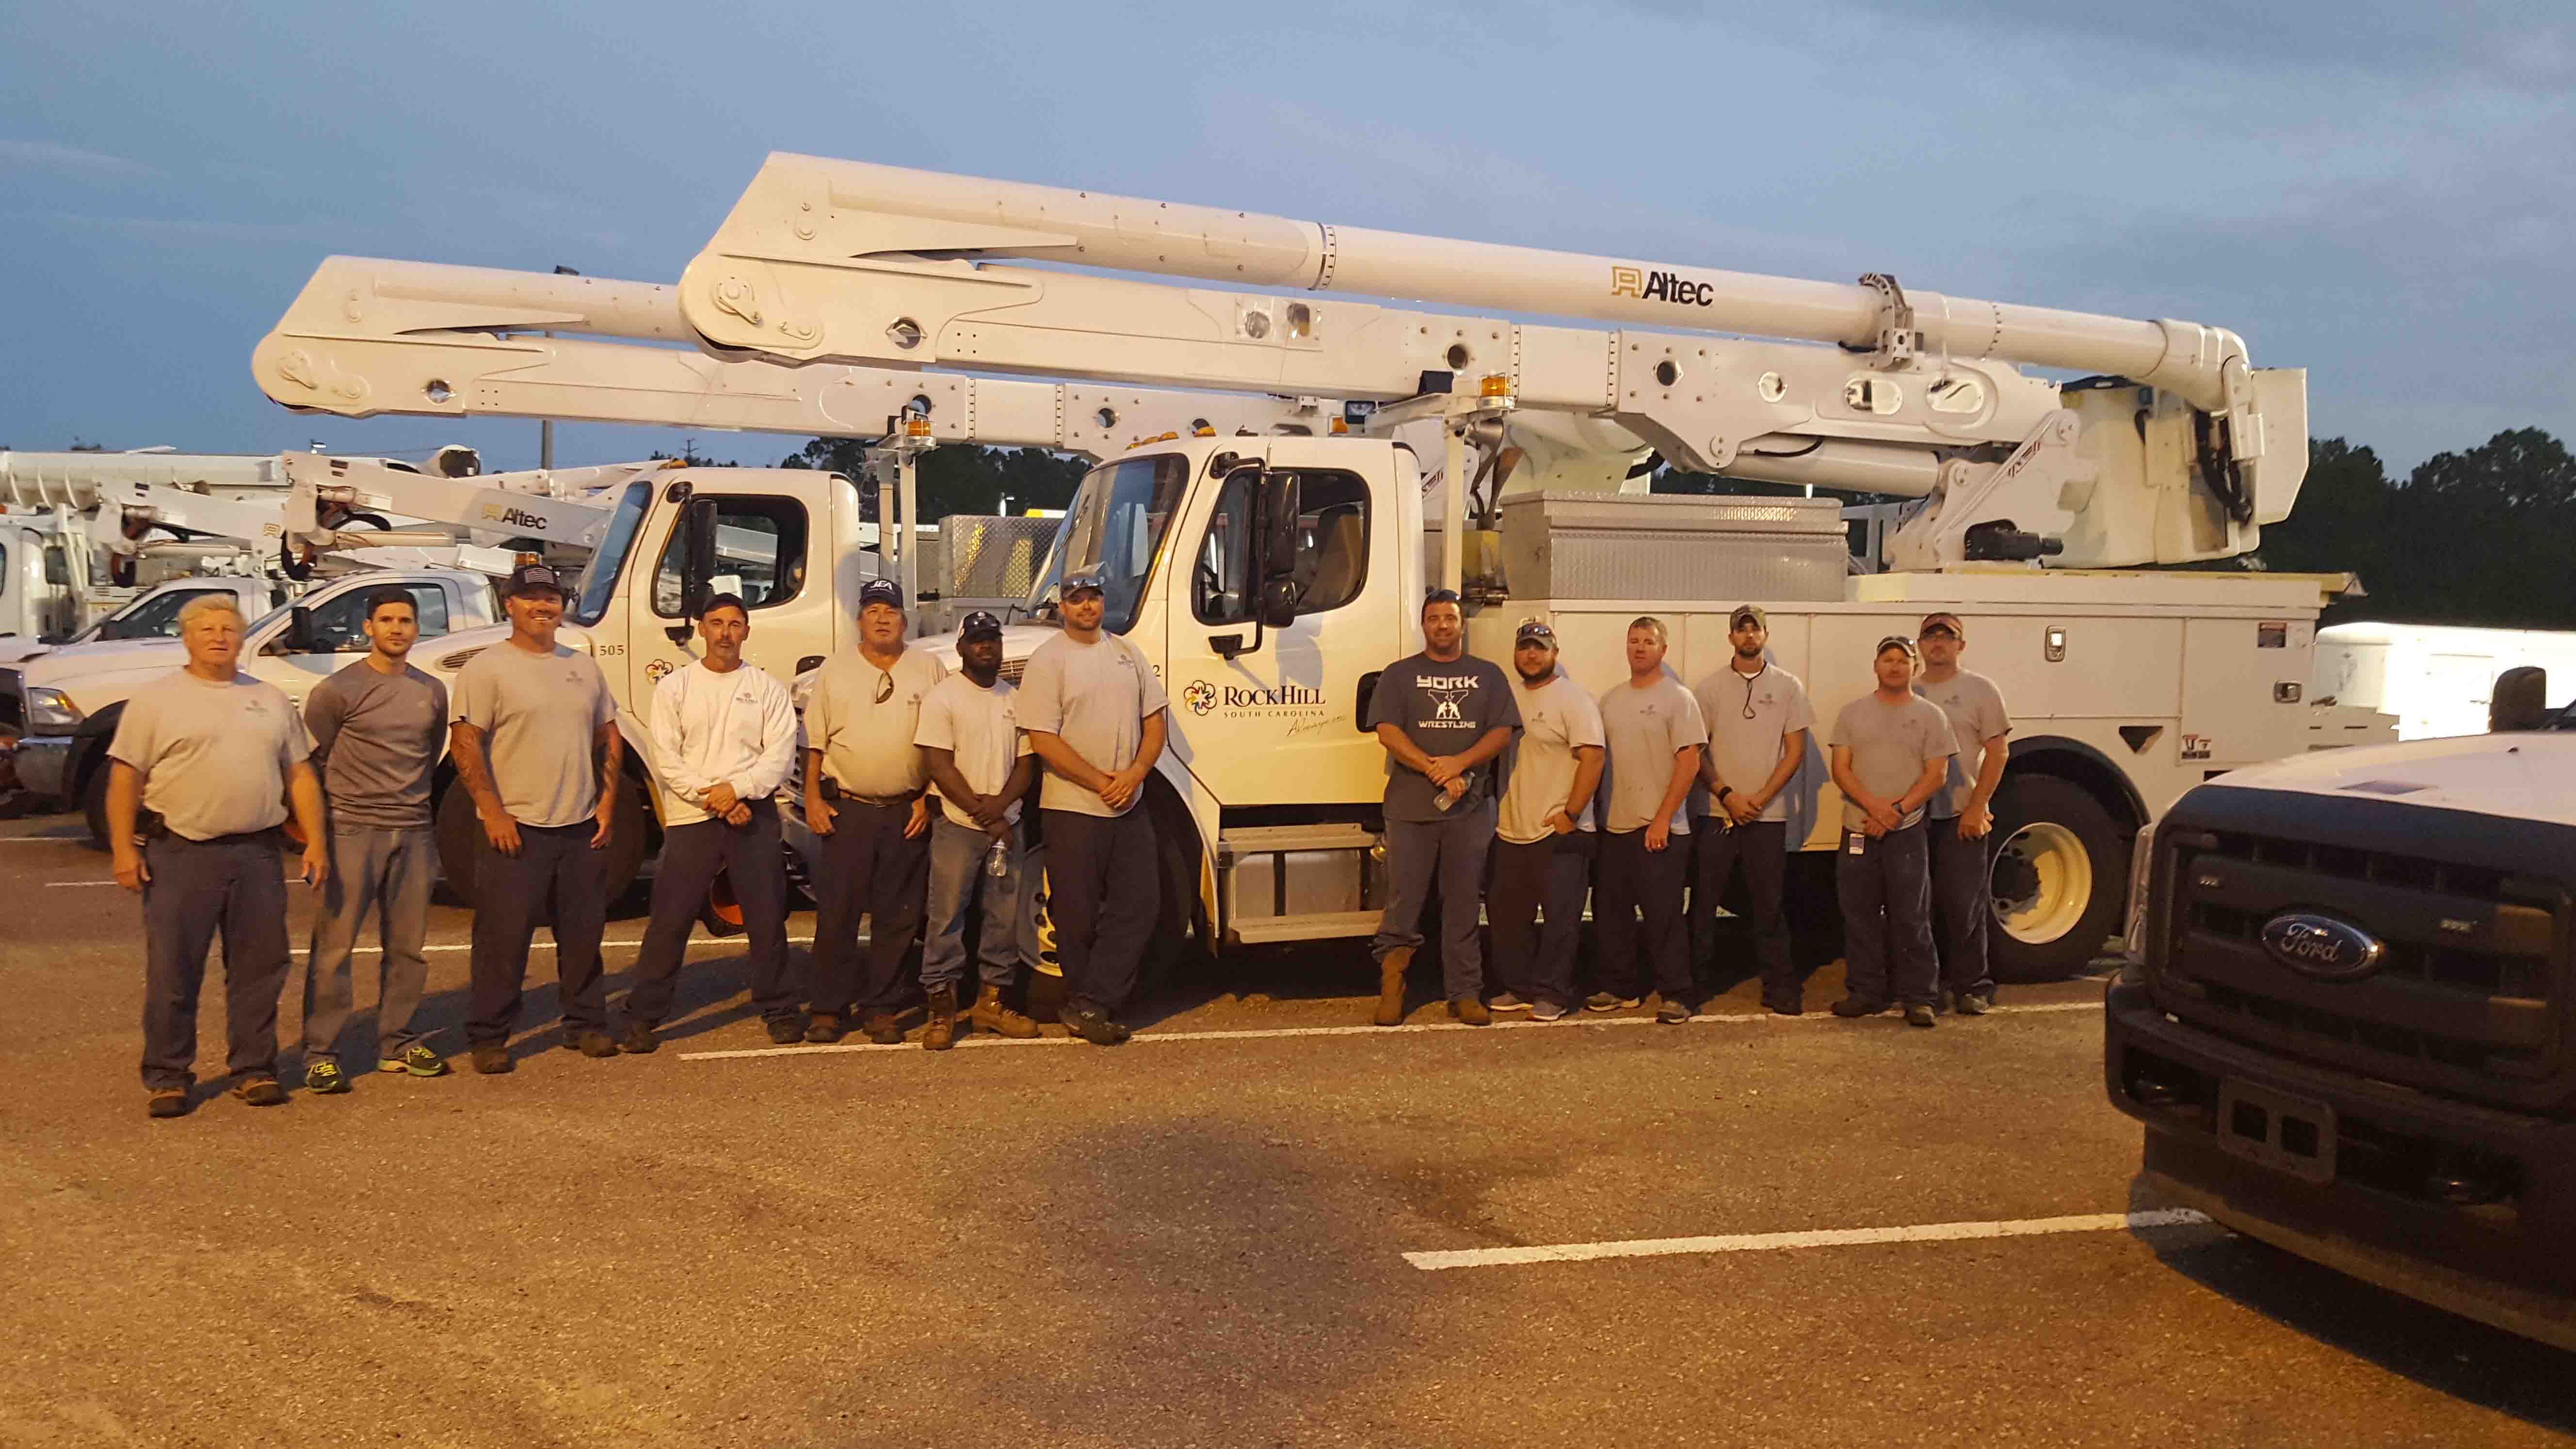 Electric linemen from the City of Rock Hill assisting Florida